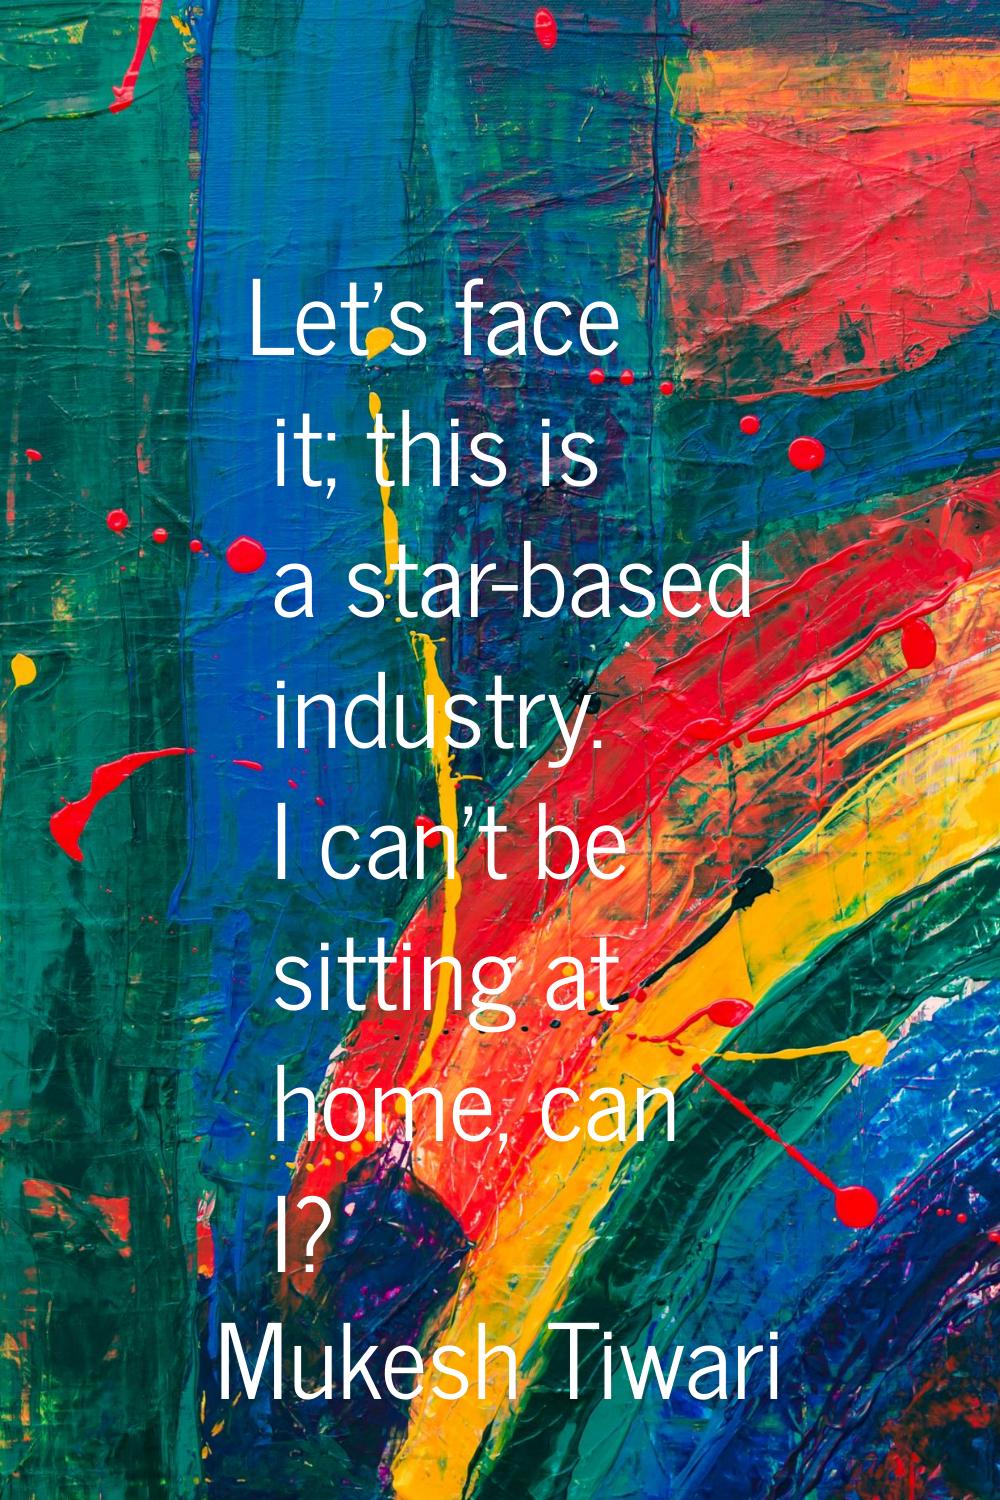 Let's face it; this is a star-based industry. I can't be sitting at home, can I?